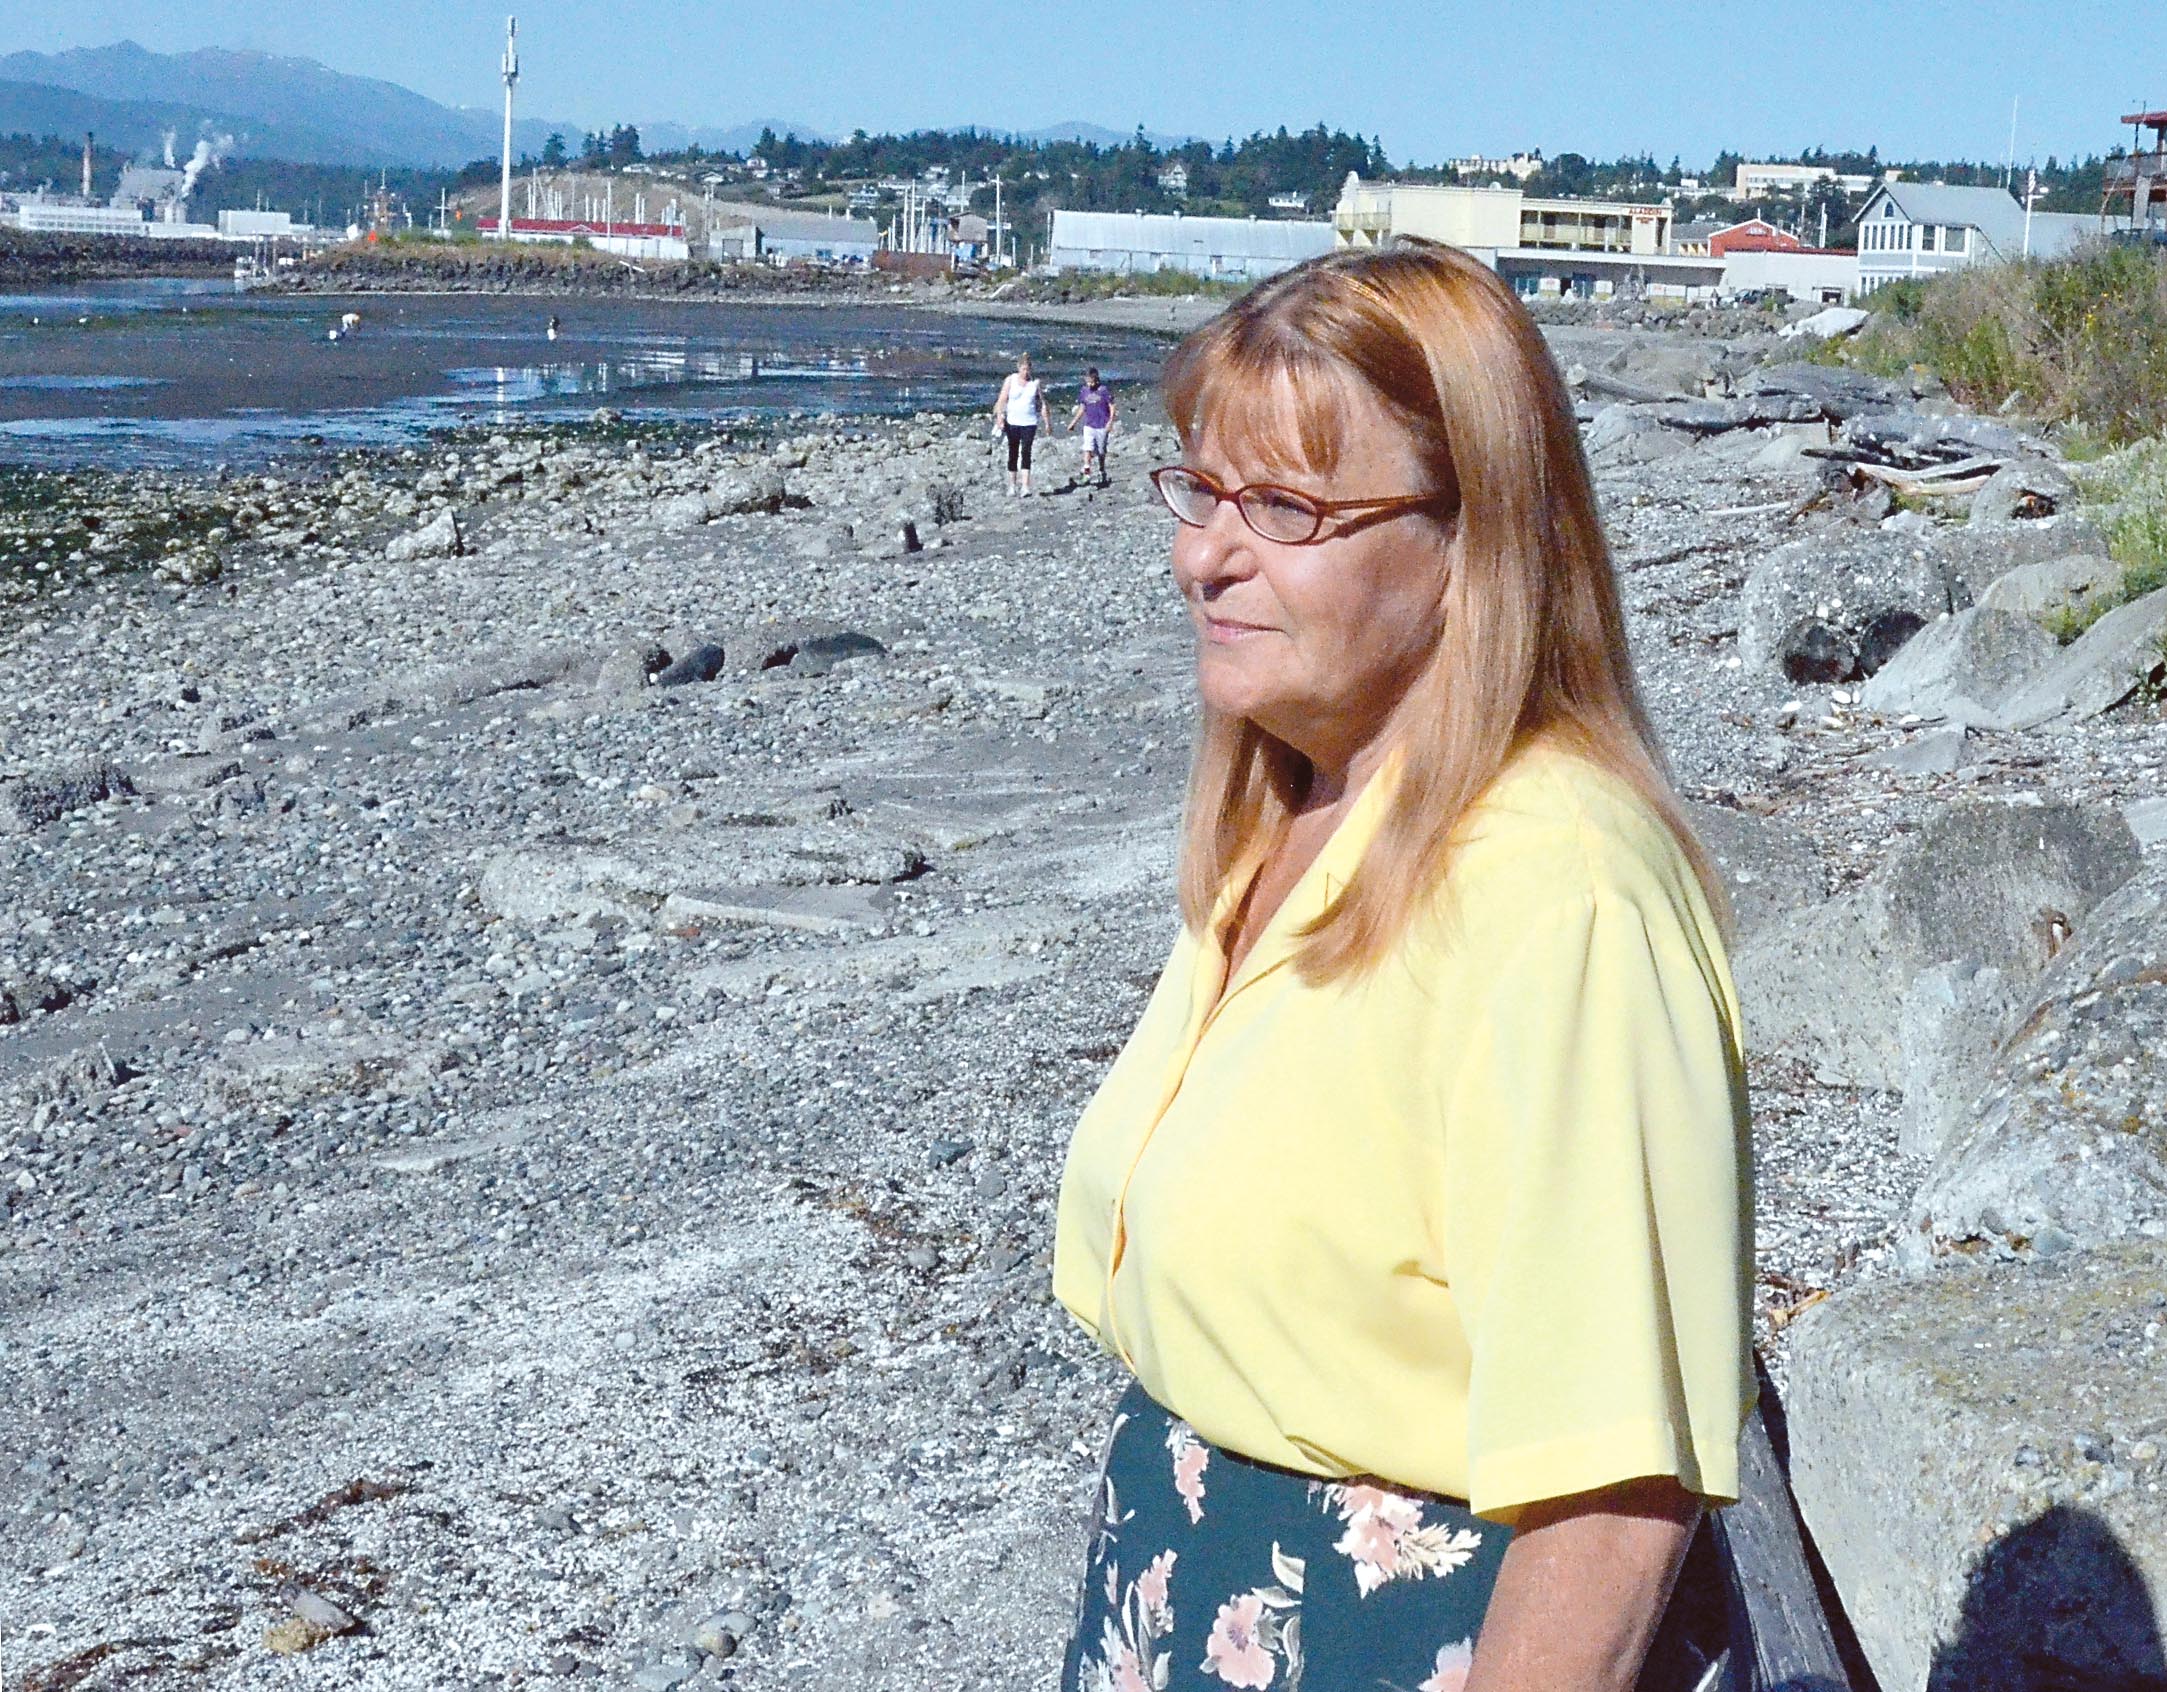 Linda LeBrane spends time every day on Indian Point Beach writing in a journal that she hopes will evolve into a memoir. Charlie Bermant/Peninsula Daily News